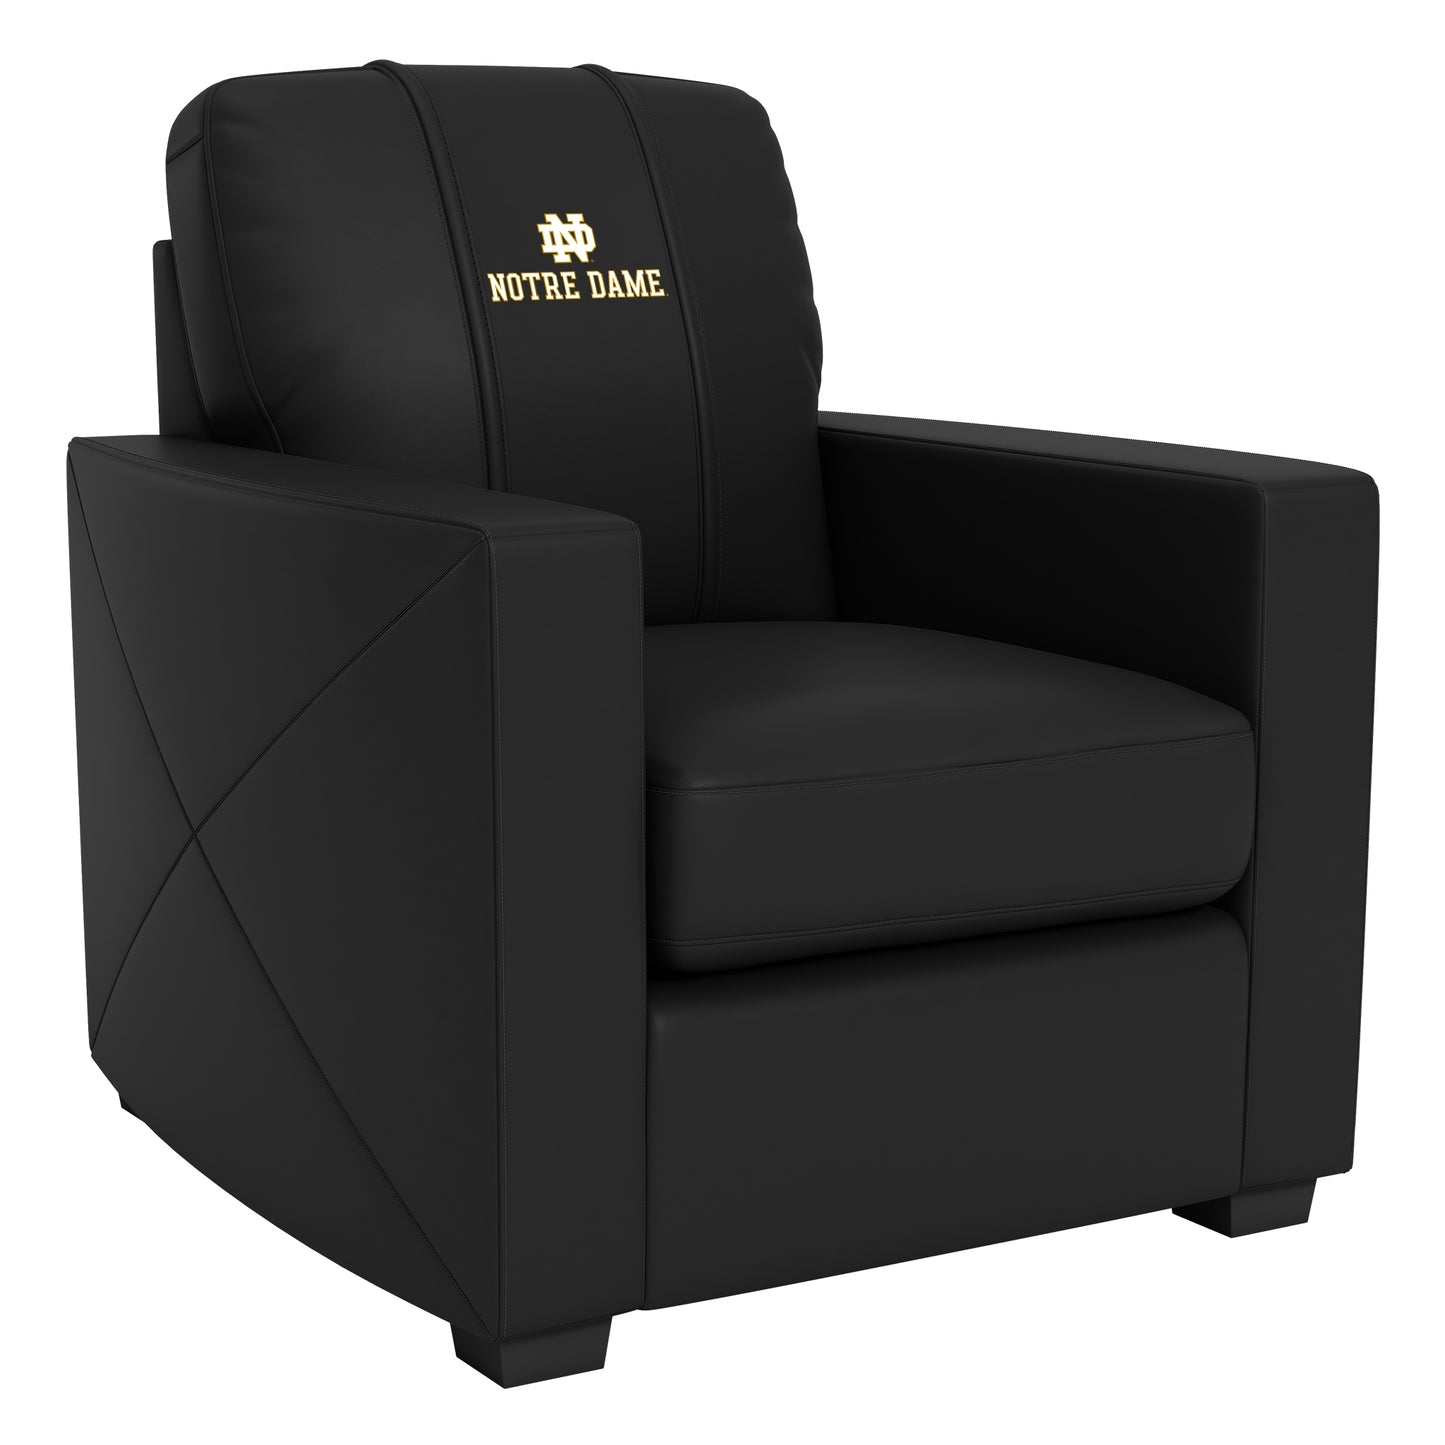 Silver Club Chair with Notre Dame Alternate Logo